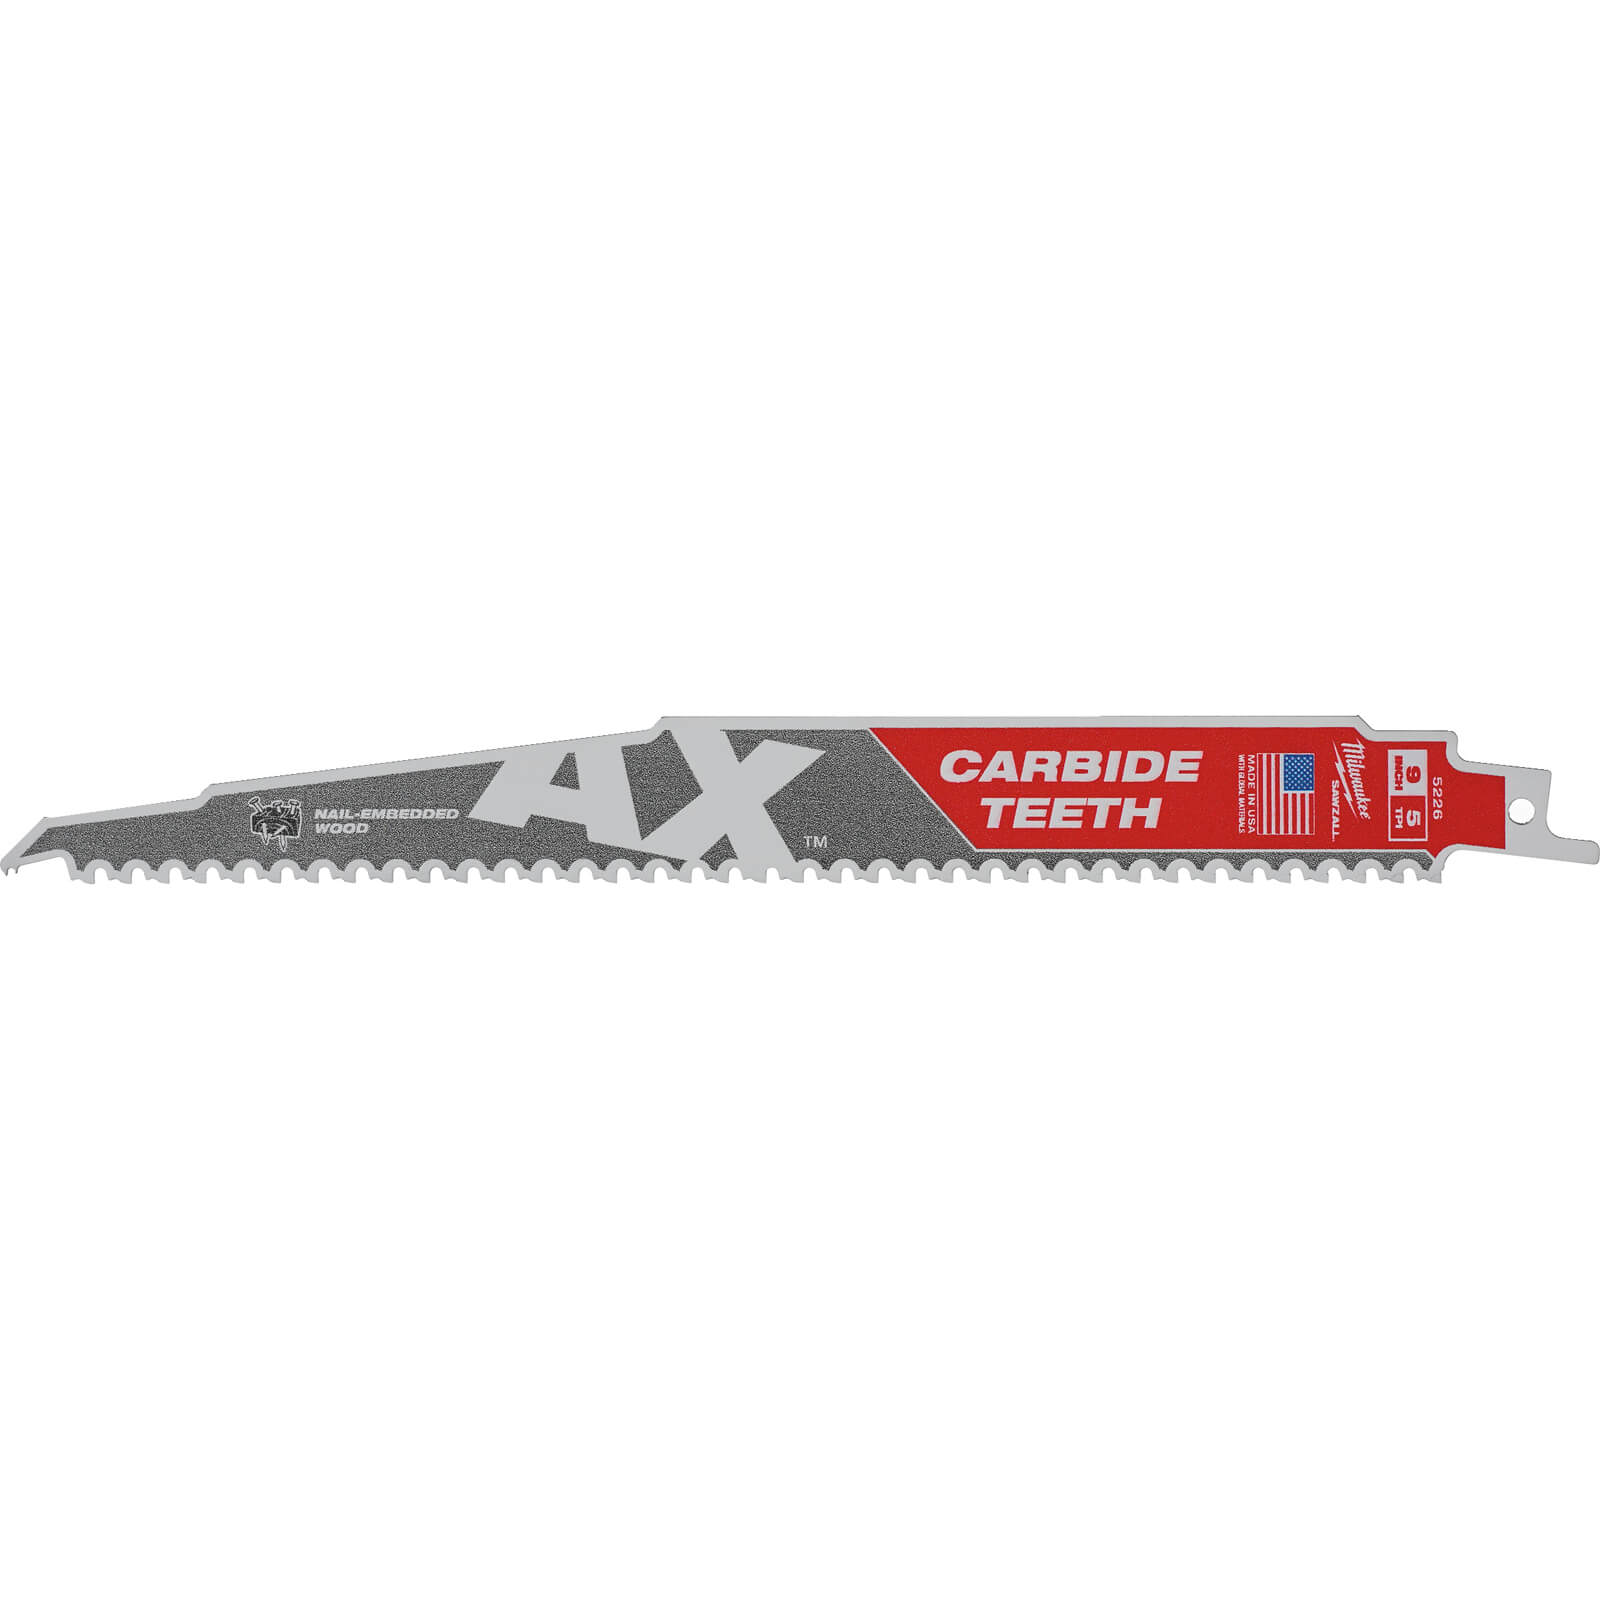 Image of Milwaukee Heavy Duty AX Carbide Demolition Reciprocating Sabre Saw Blades 230mm Pack of 5